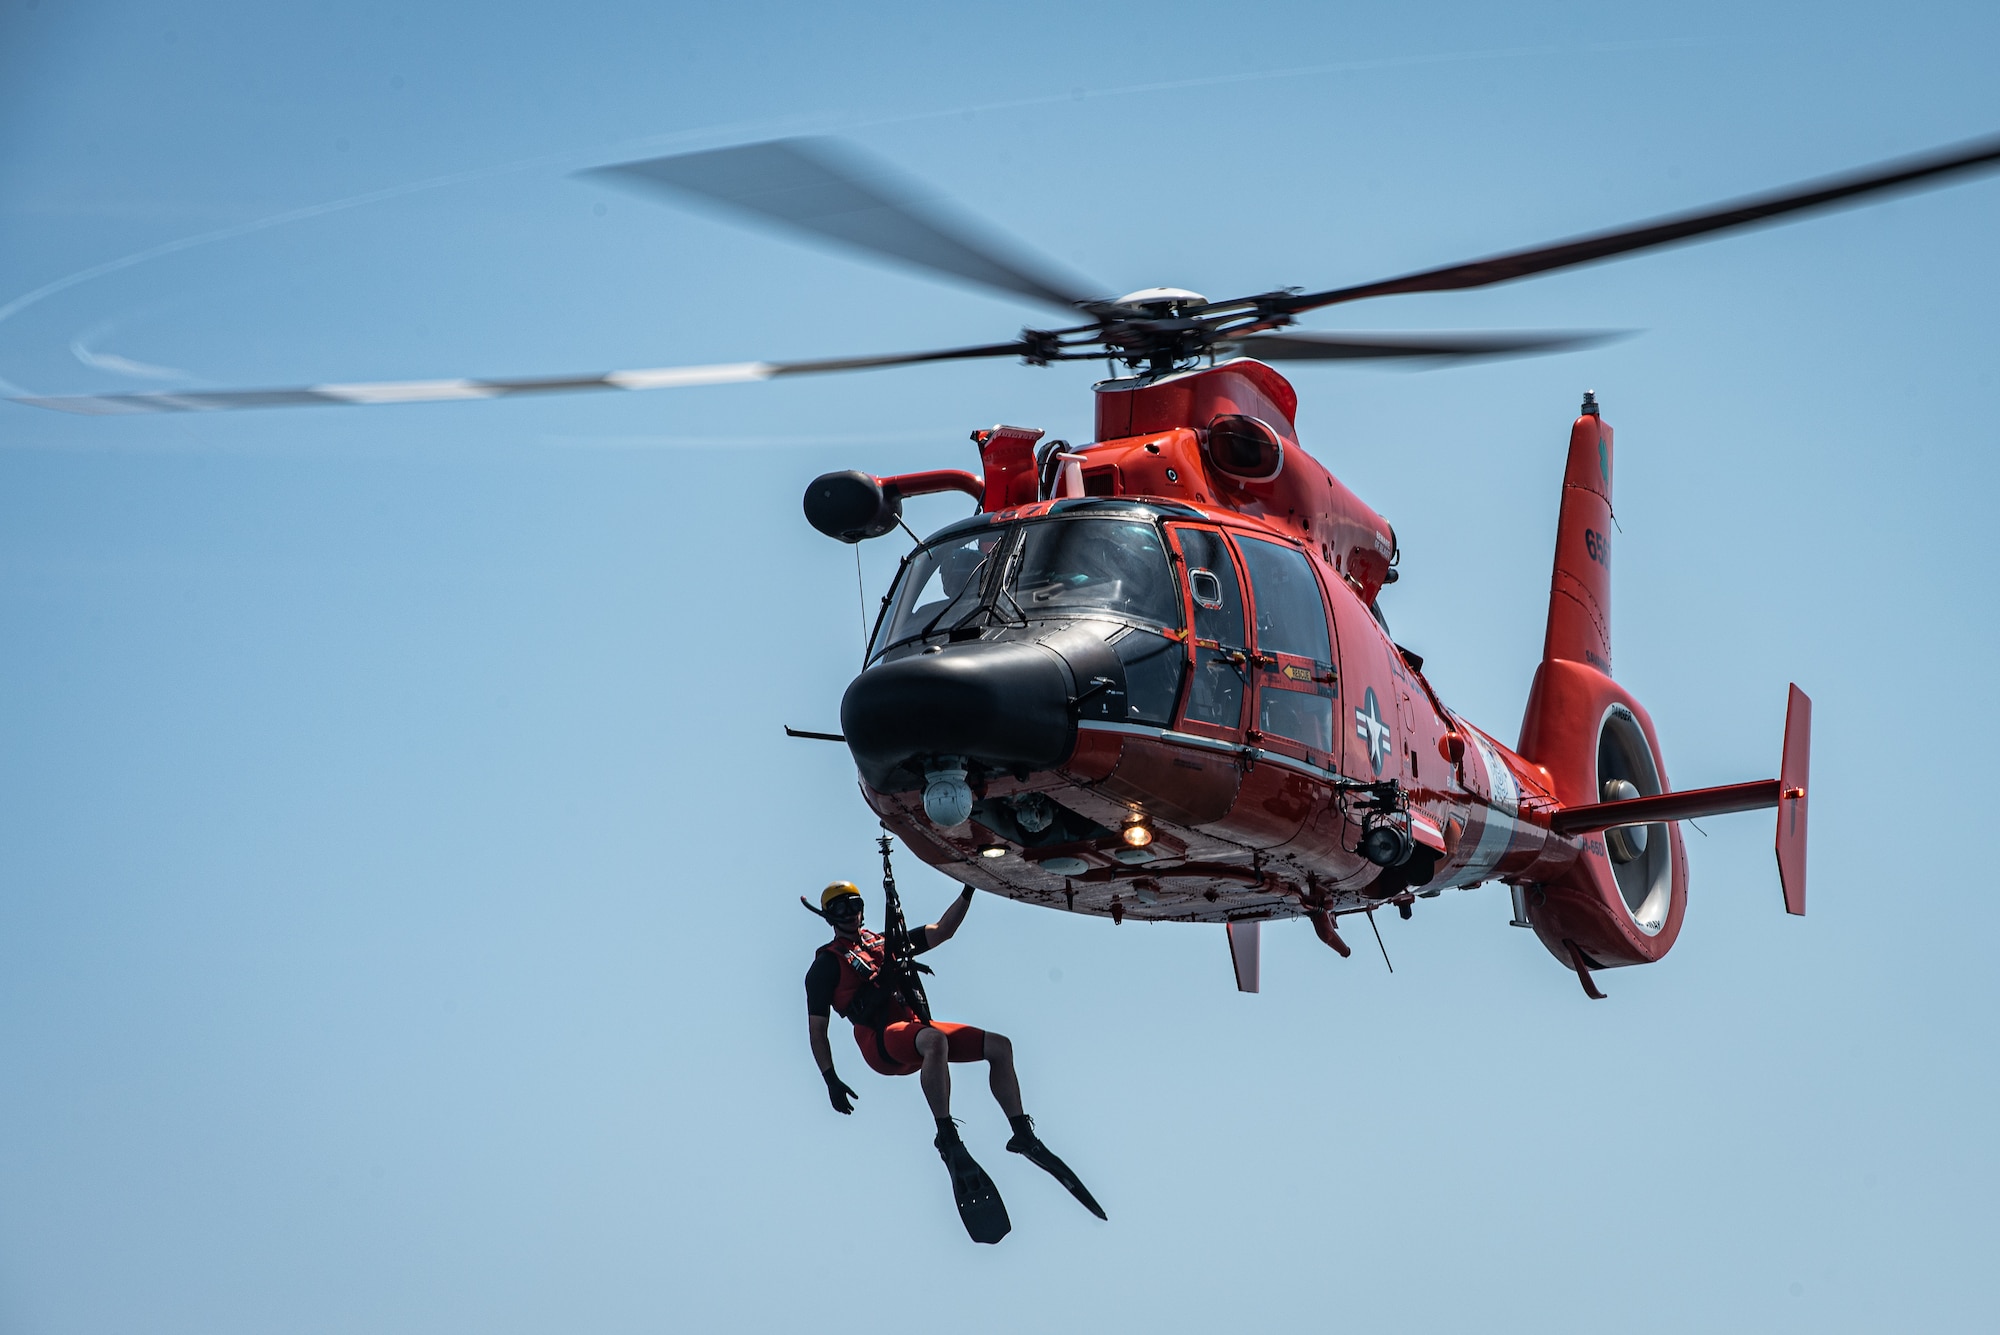 A U.S. Coast Guard (USCG) rescue swimmer hangs of the side of an MH-65 Dolphin off the coast of Tybee Island Coast Guard Station, Georgia, June 21. 2019.